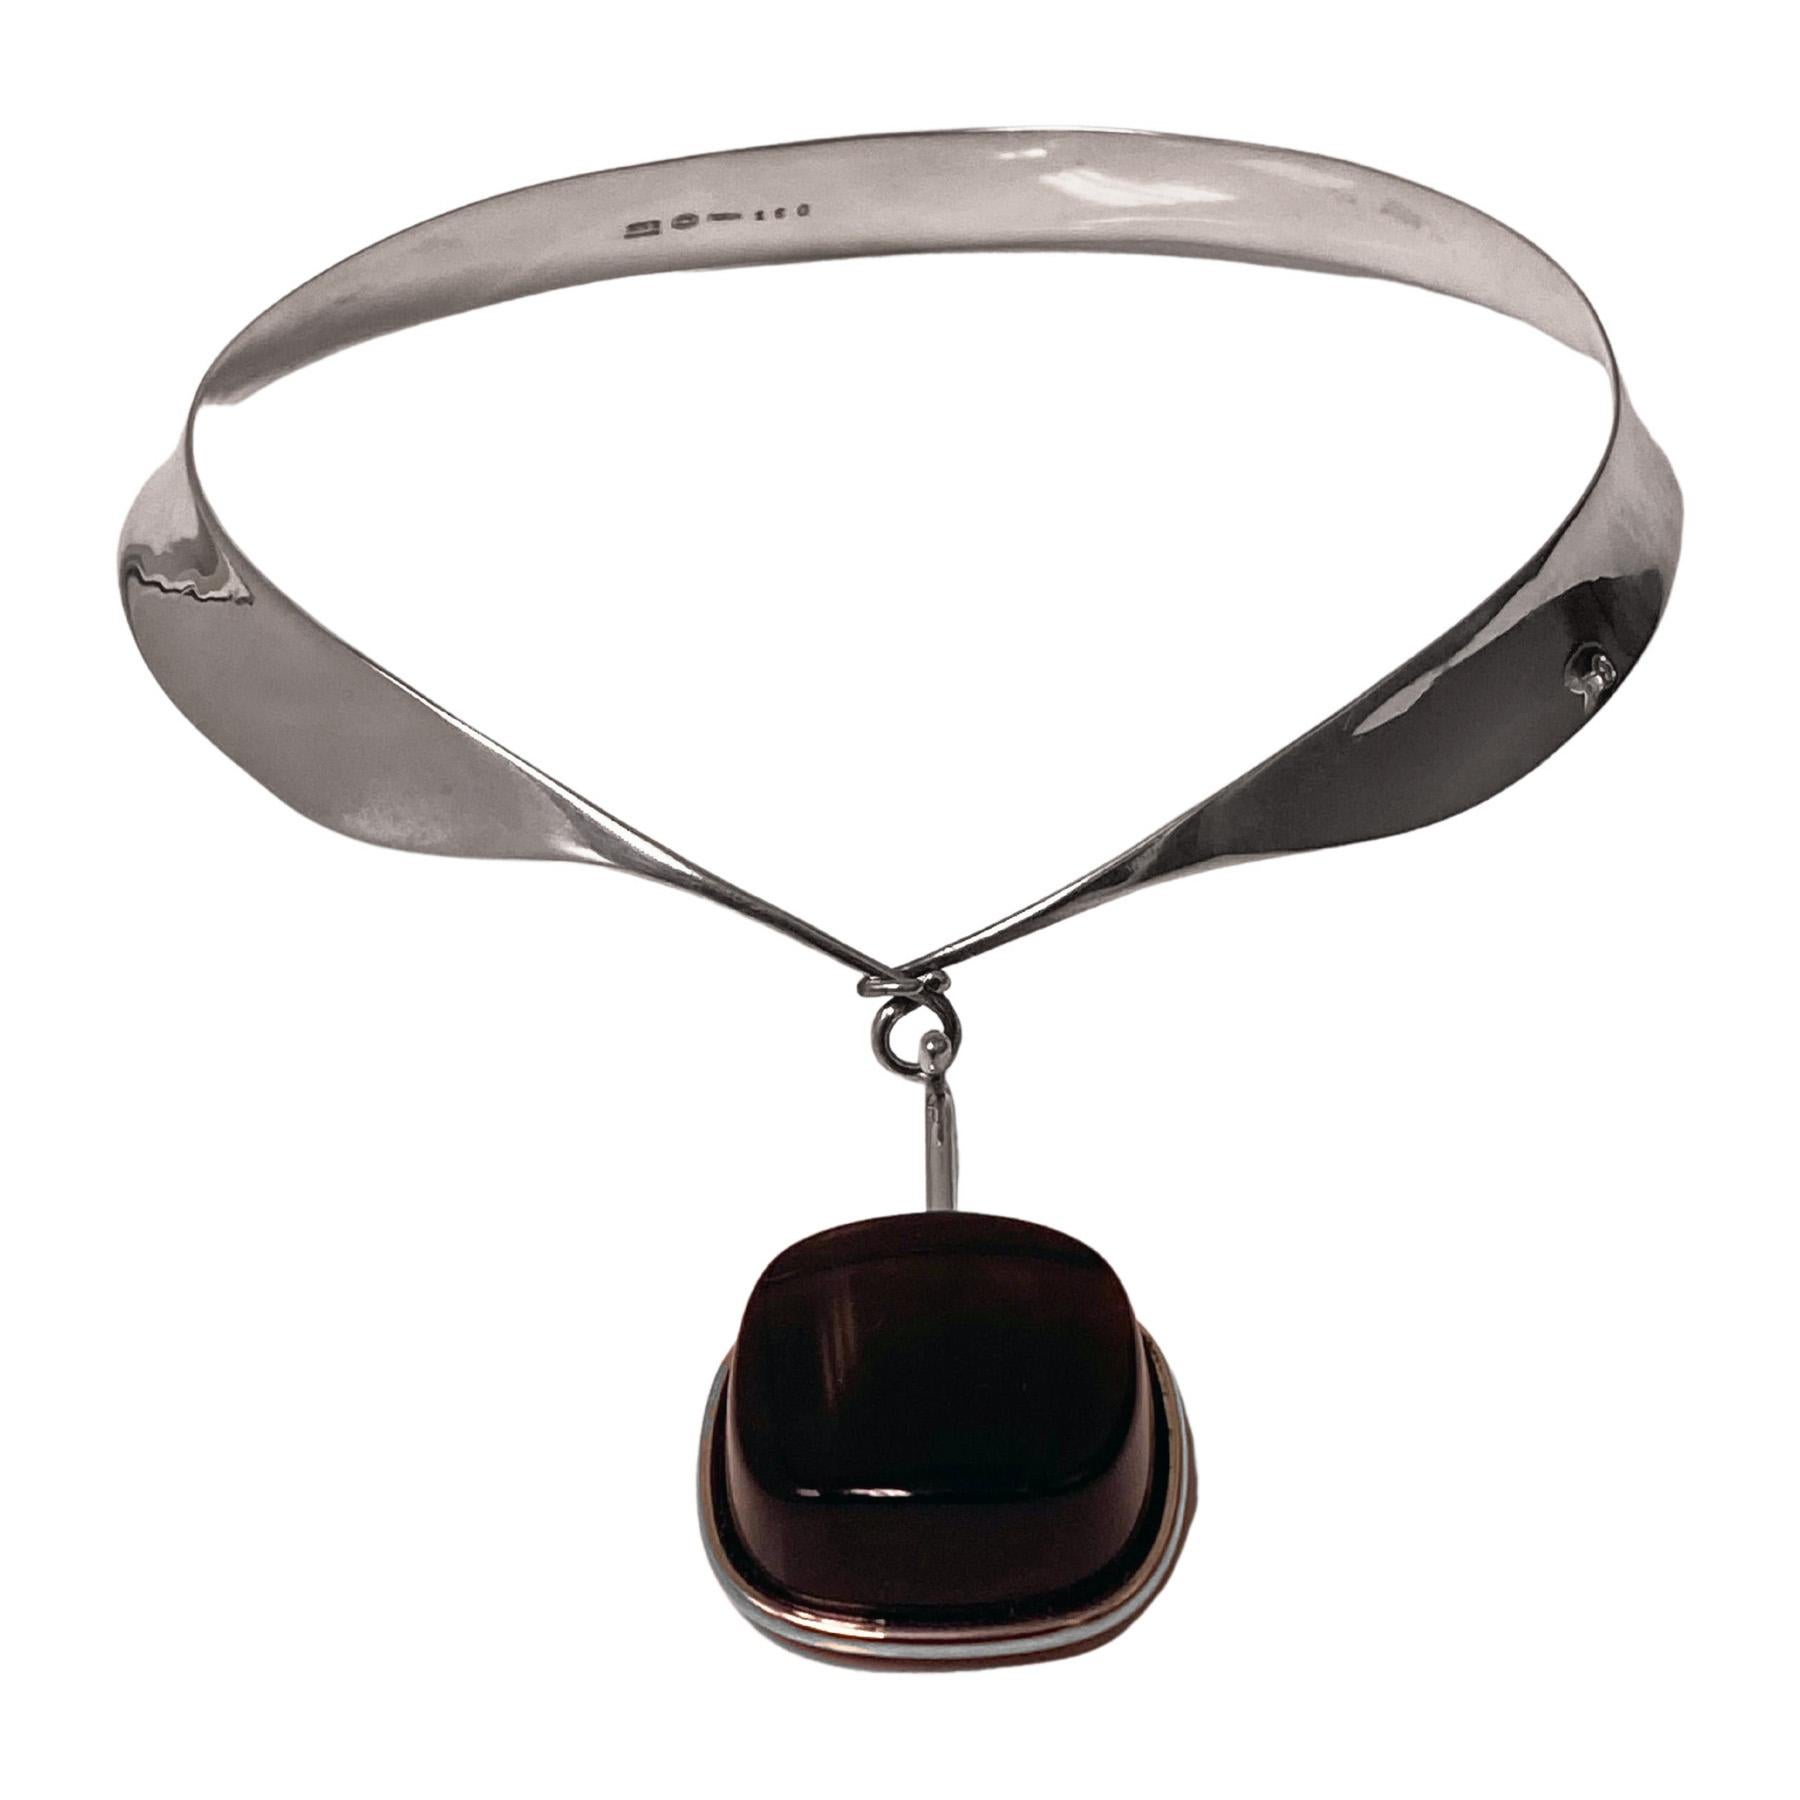 Vivianna Torun Bulow Hube for George Jensen, a rare silver brown rock crystal pendant on collar, Denmark, C. 1969, #160 and 132, stamped Georg Jensen in a dotted oval, Denmark,Torun, 160, 132  925S. Will fit up to 19-inch neck, pendant, No 132 drop,